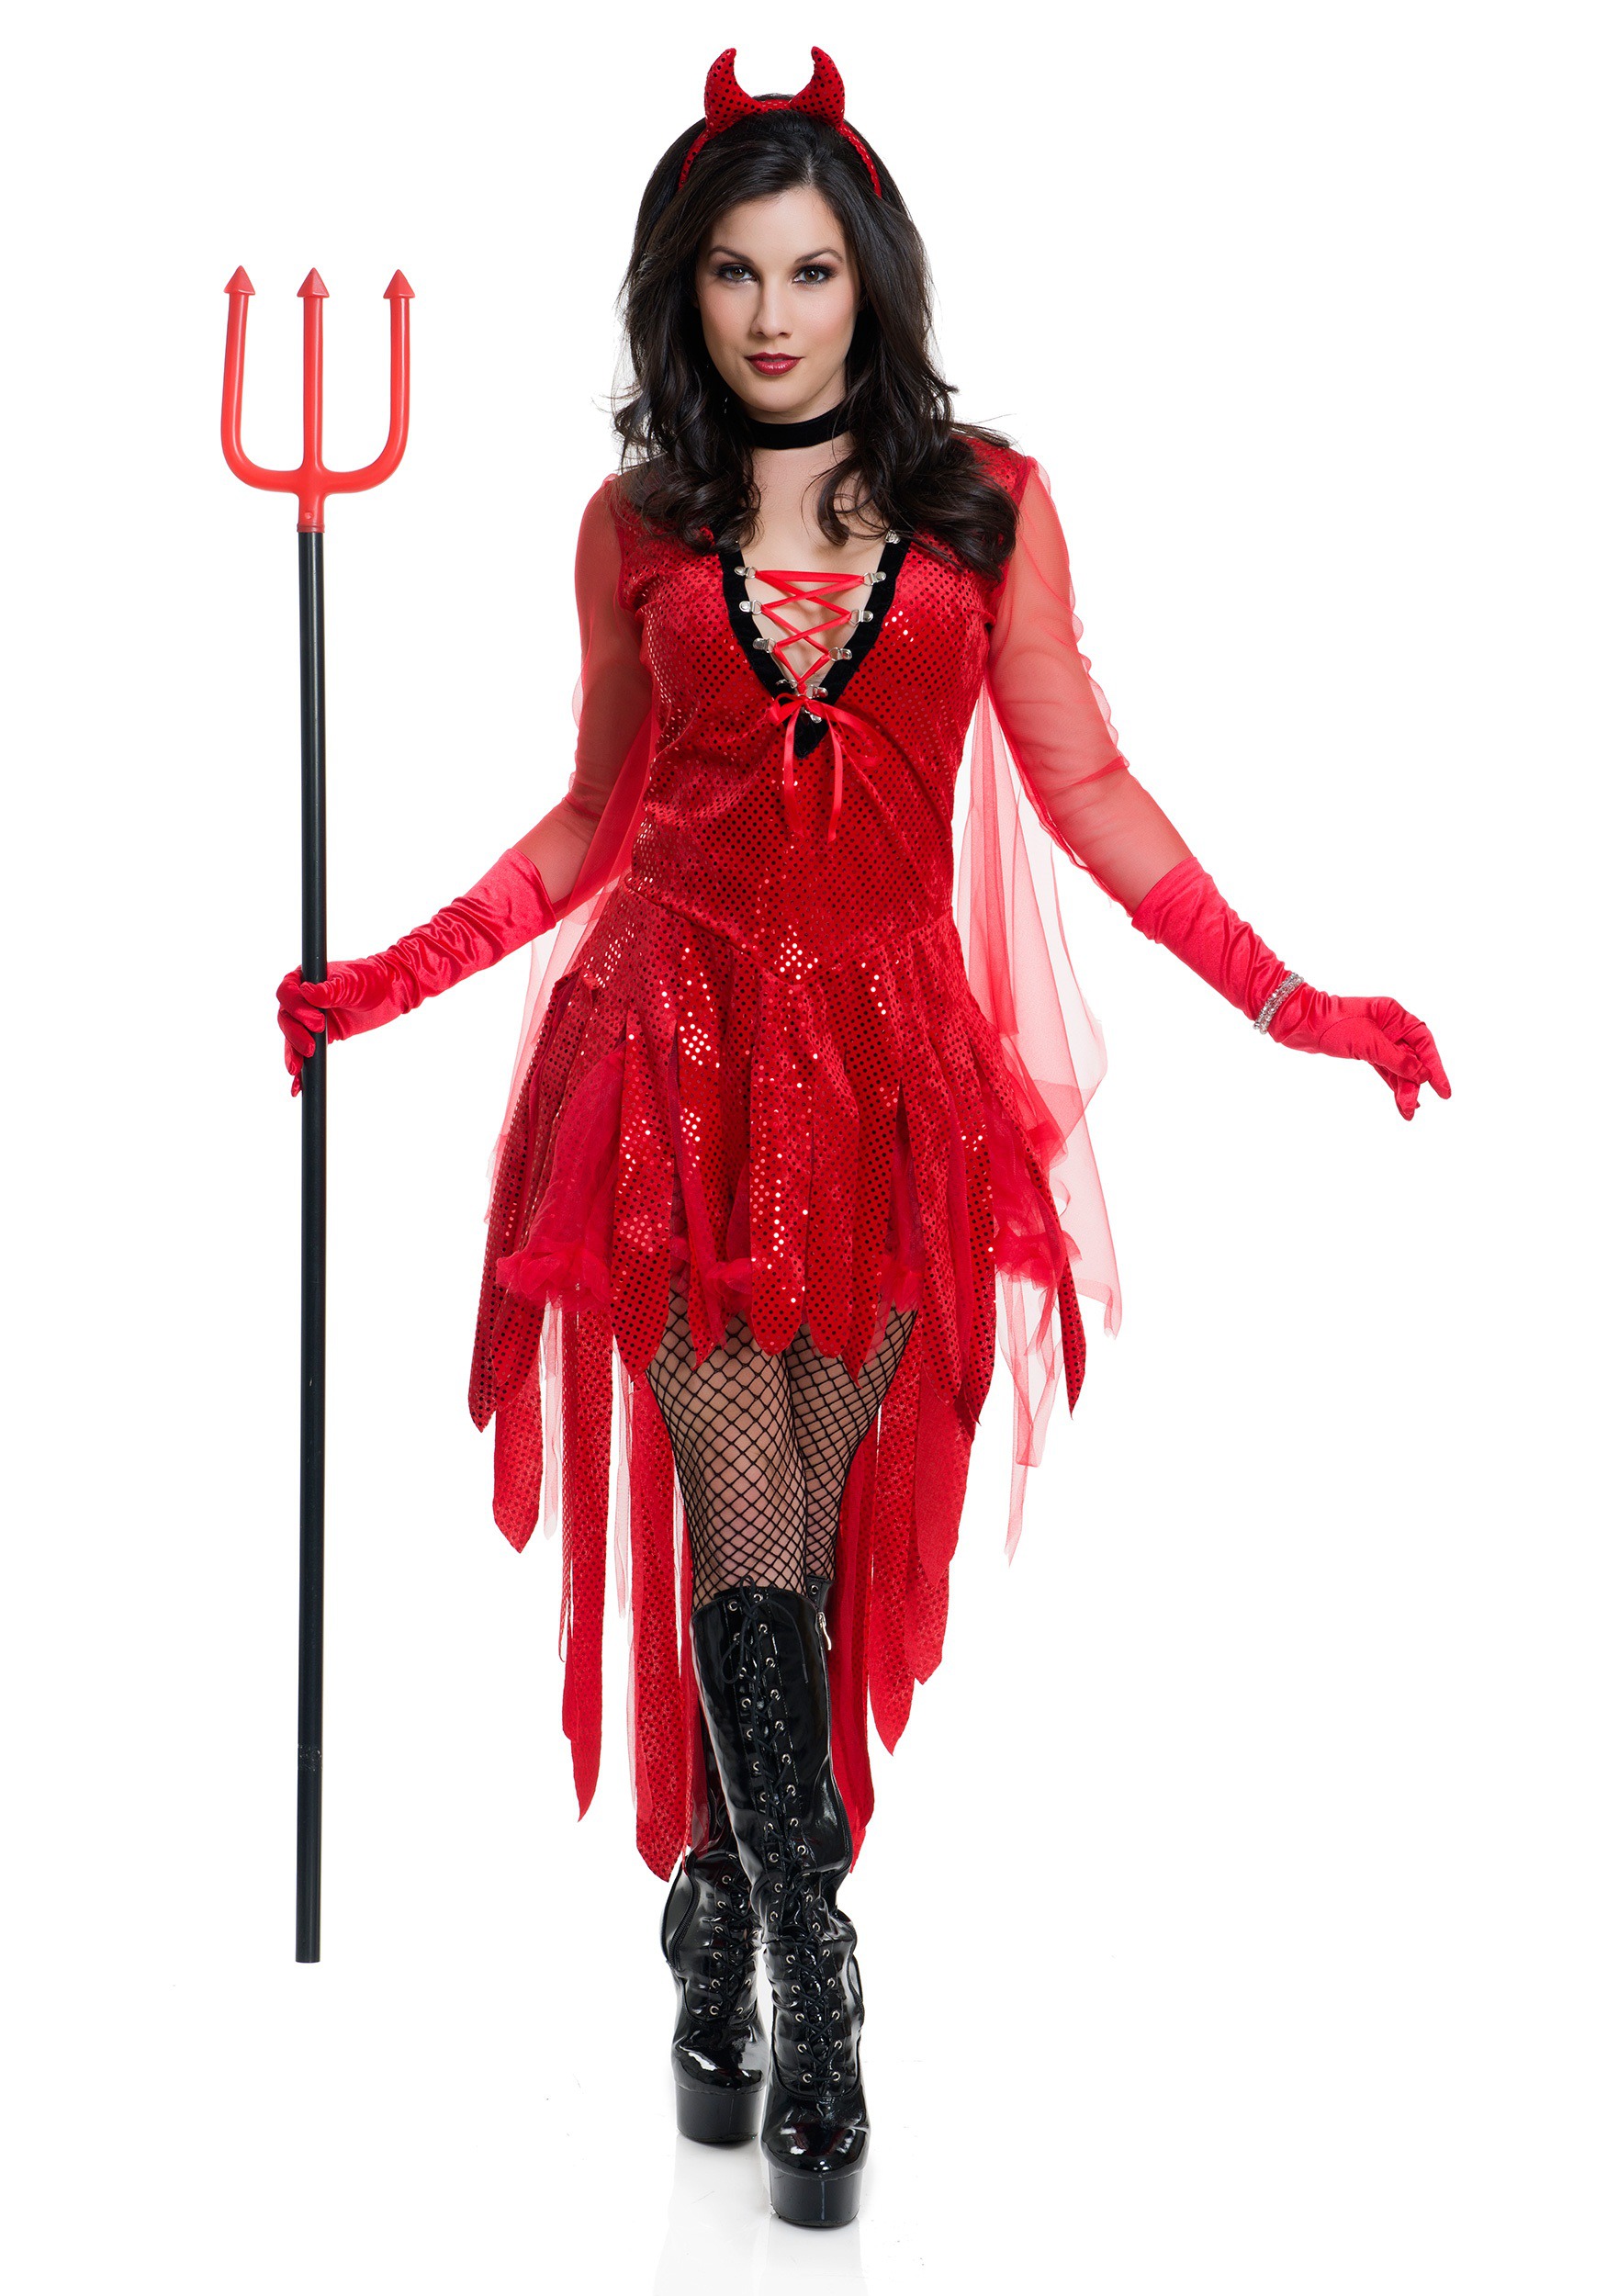 Photos - Fancy Dress Charades Sizzling Devil Women's Costume Black/Red CH03056V